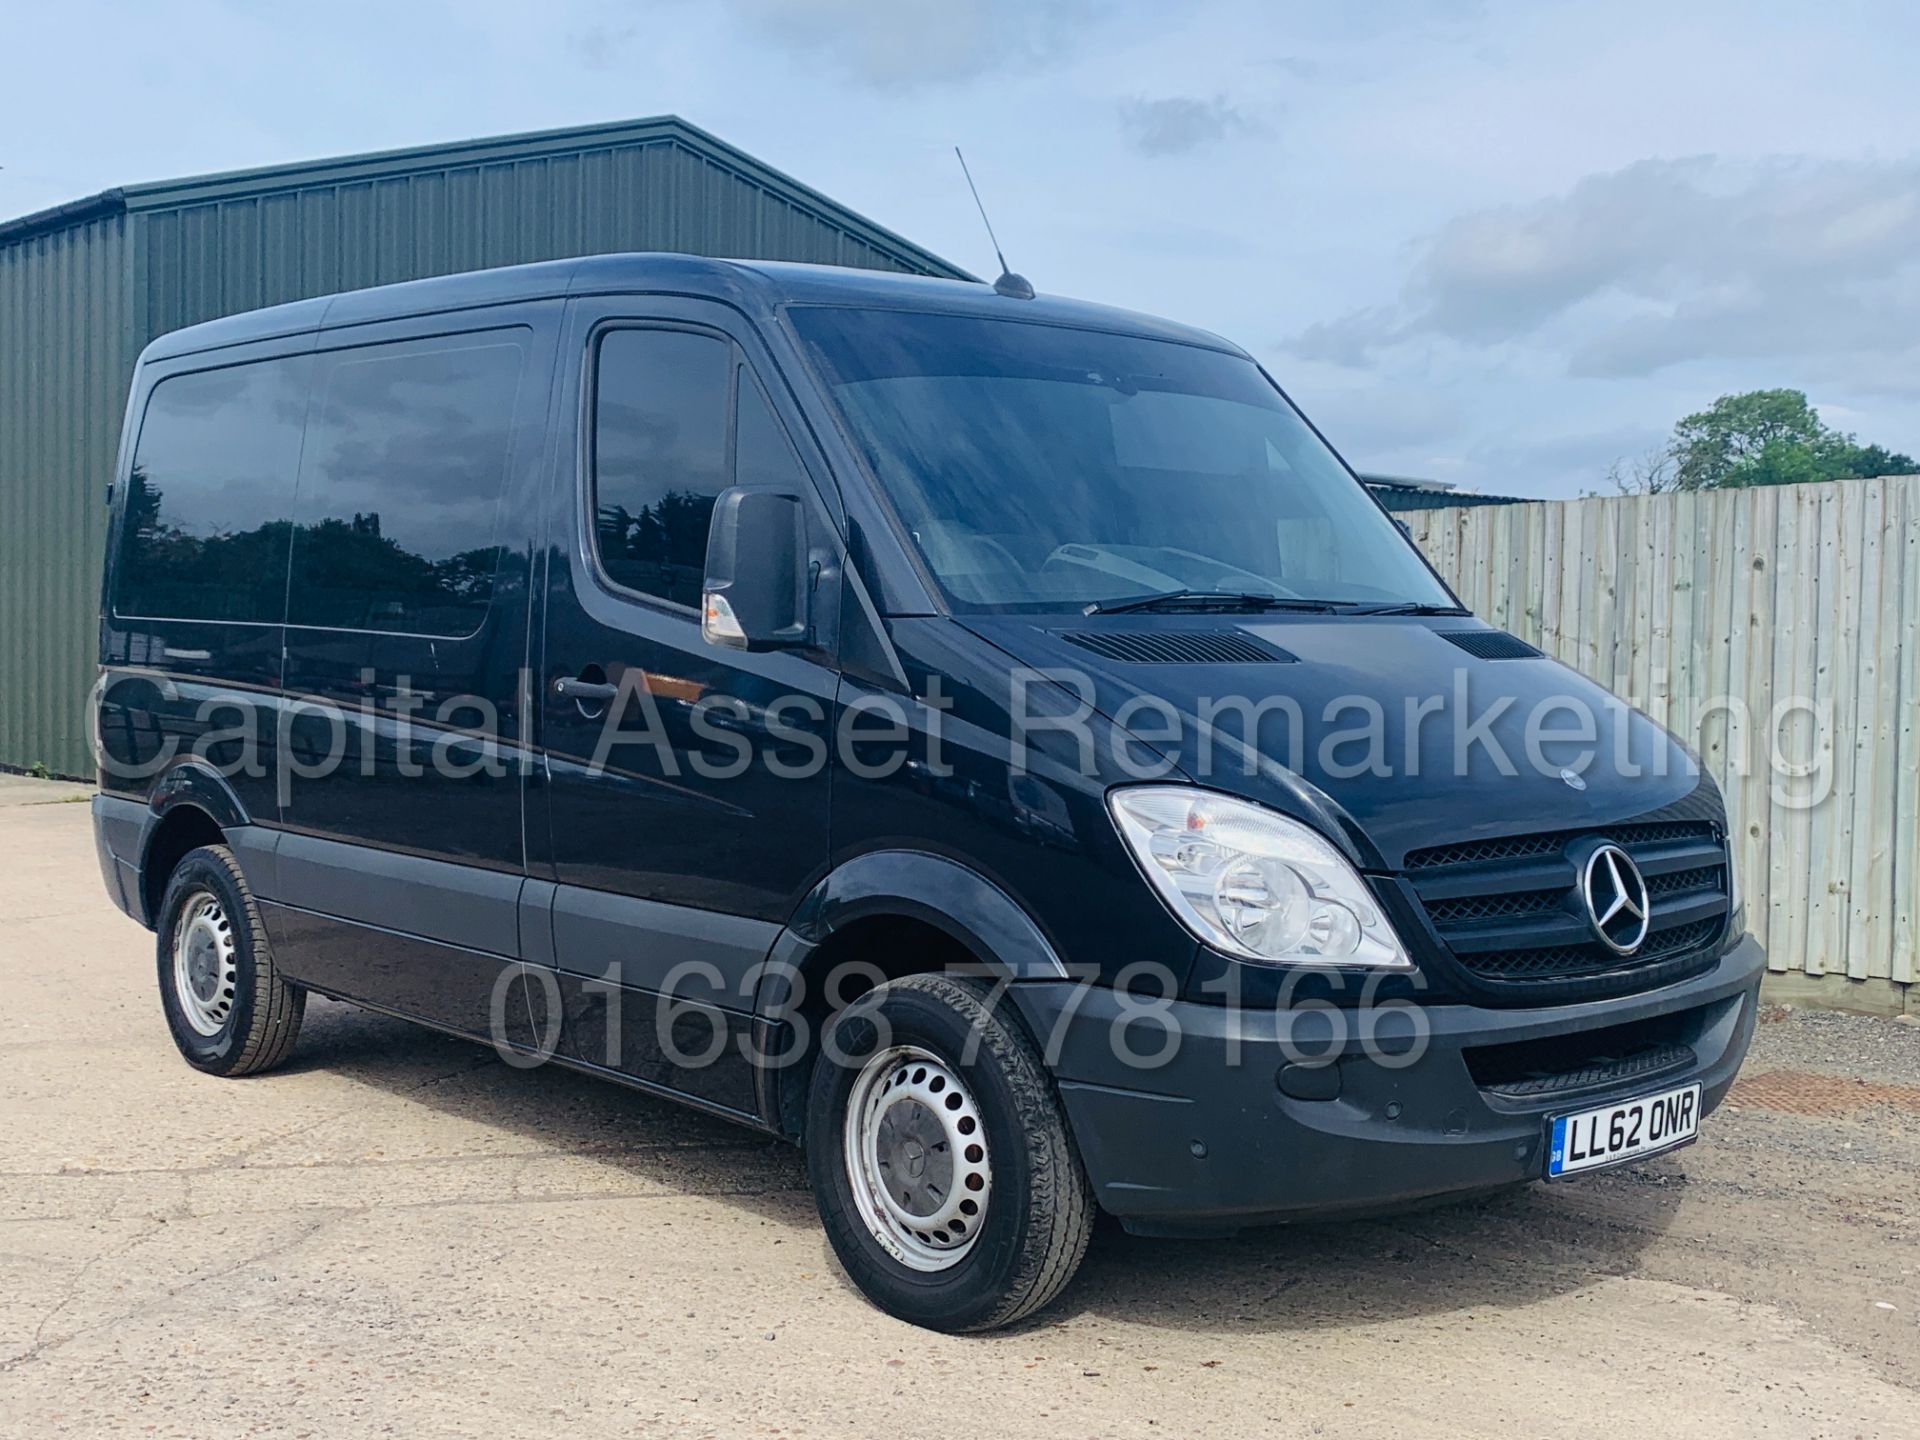 (ON SALE) MERCEDES-BENZ SPRINTER 210 CDI *WHEEL CHAIR ACCESSIBLE - DISABILITY VEHICLE* (2013 MODEL) - Image 3 of 45